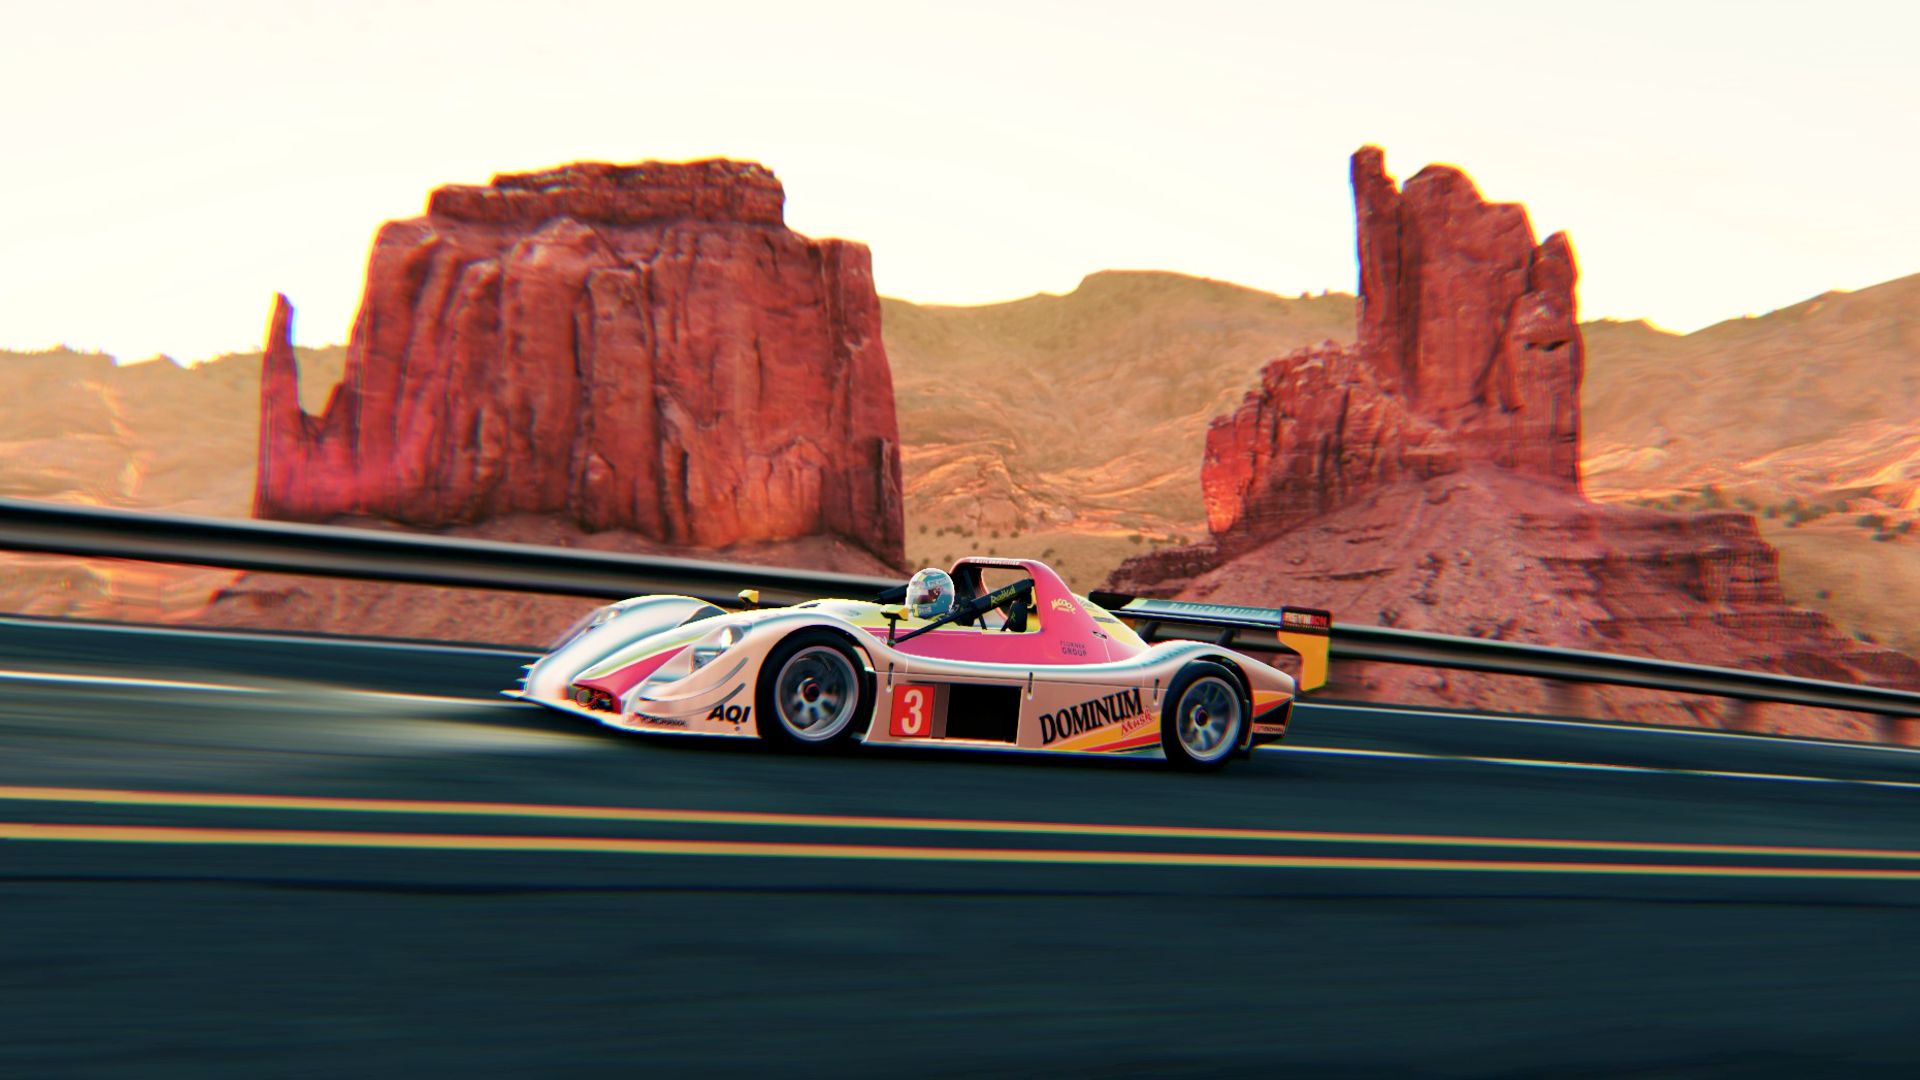 Project CARS 3 Announced for PC - CyberPowerPC